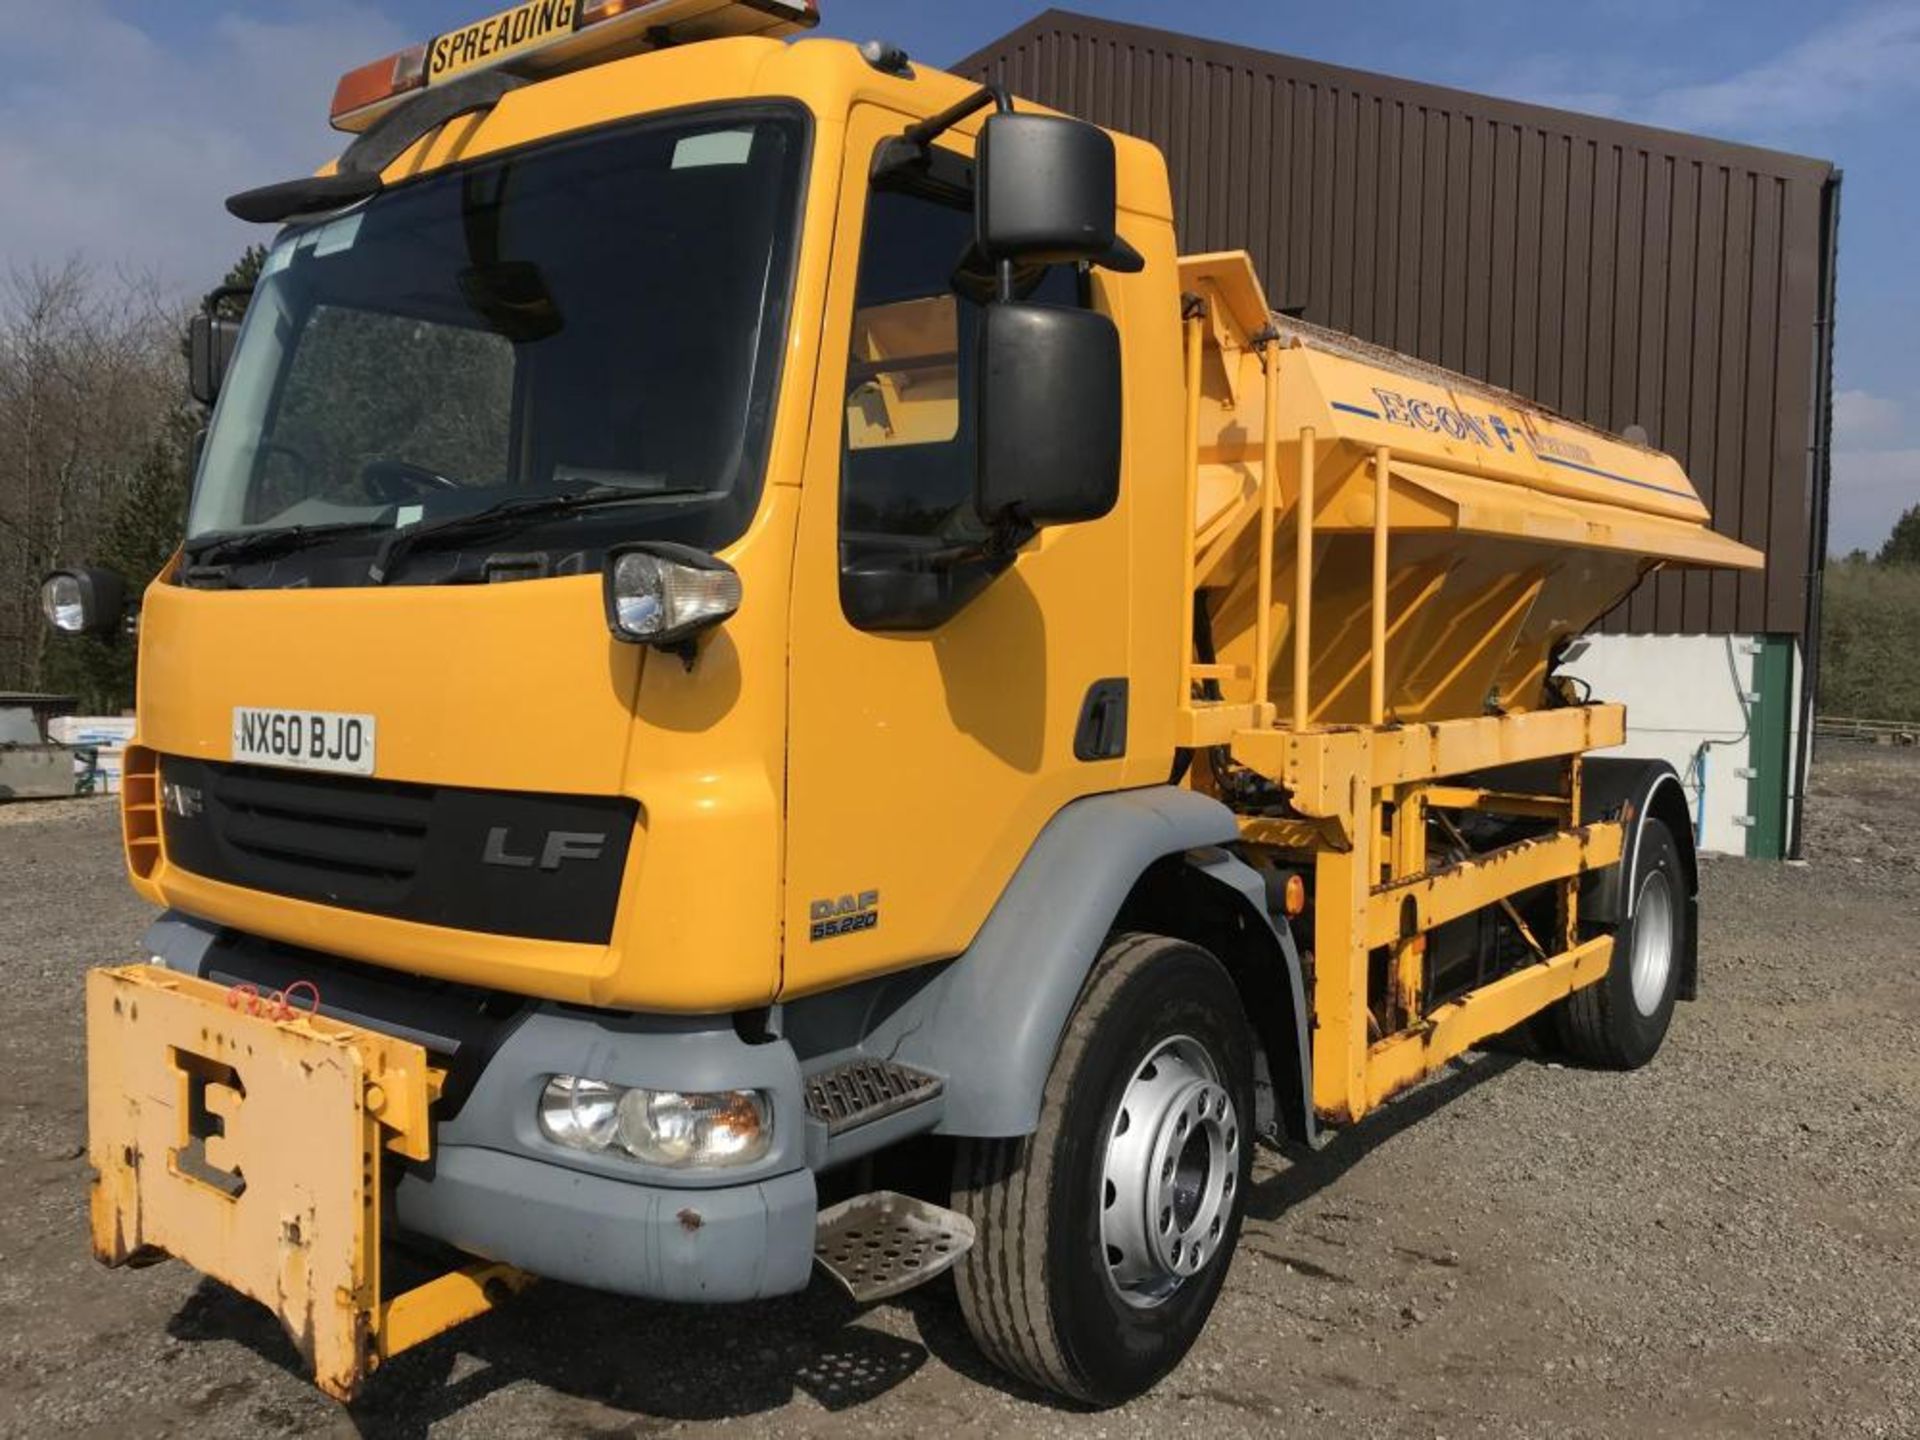 2010/60 REG DAF TRUCKS LF FA 55.220 18 TON GRITTER EX COUNCIL ECON BODY SPREADER MANUAL GEARBOX - Image 3 of 14